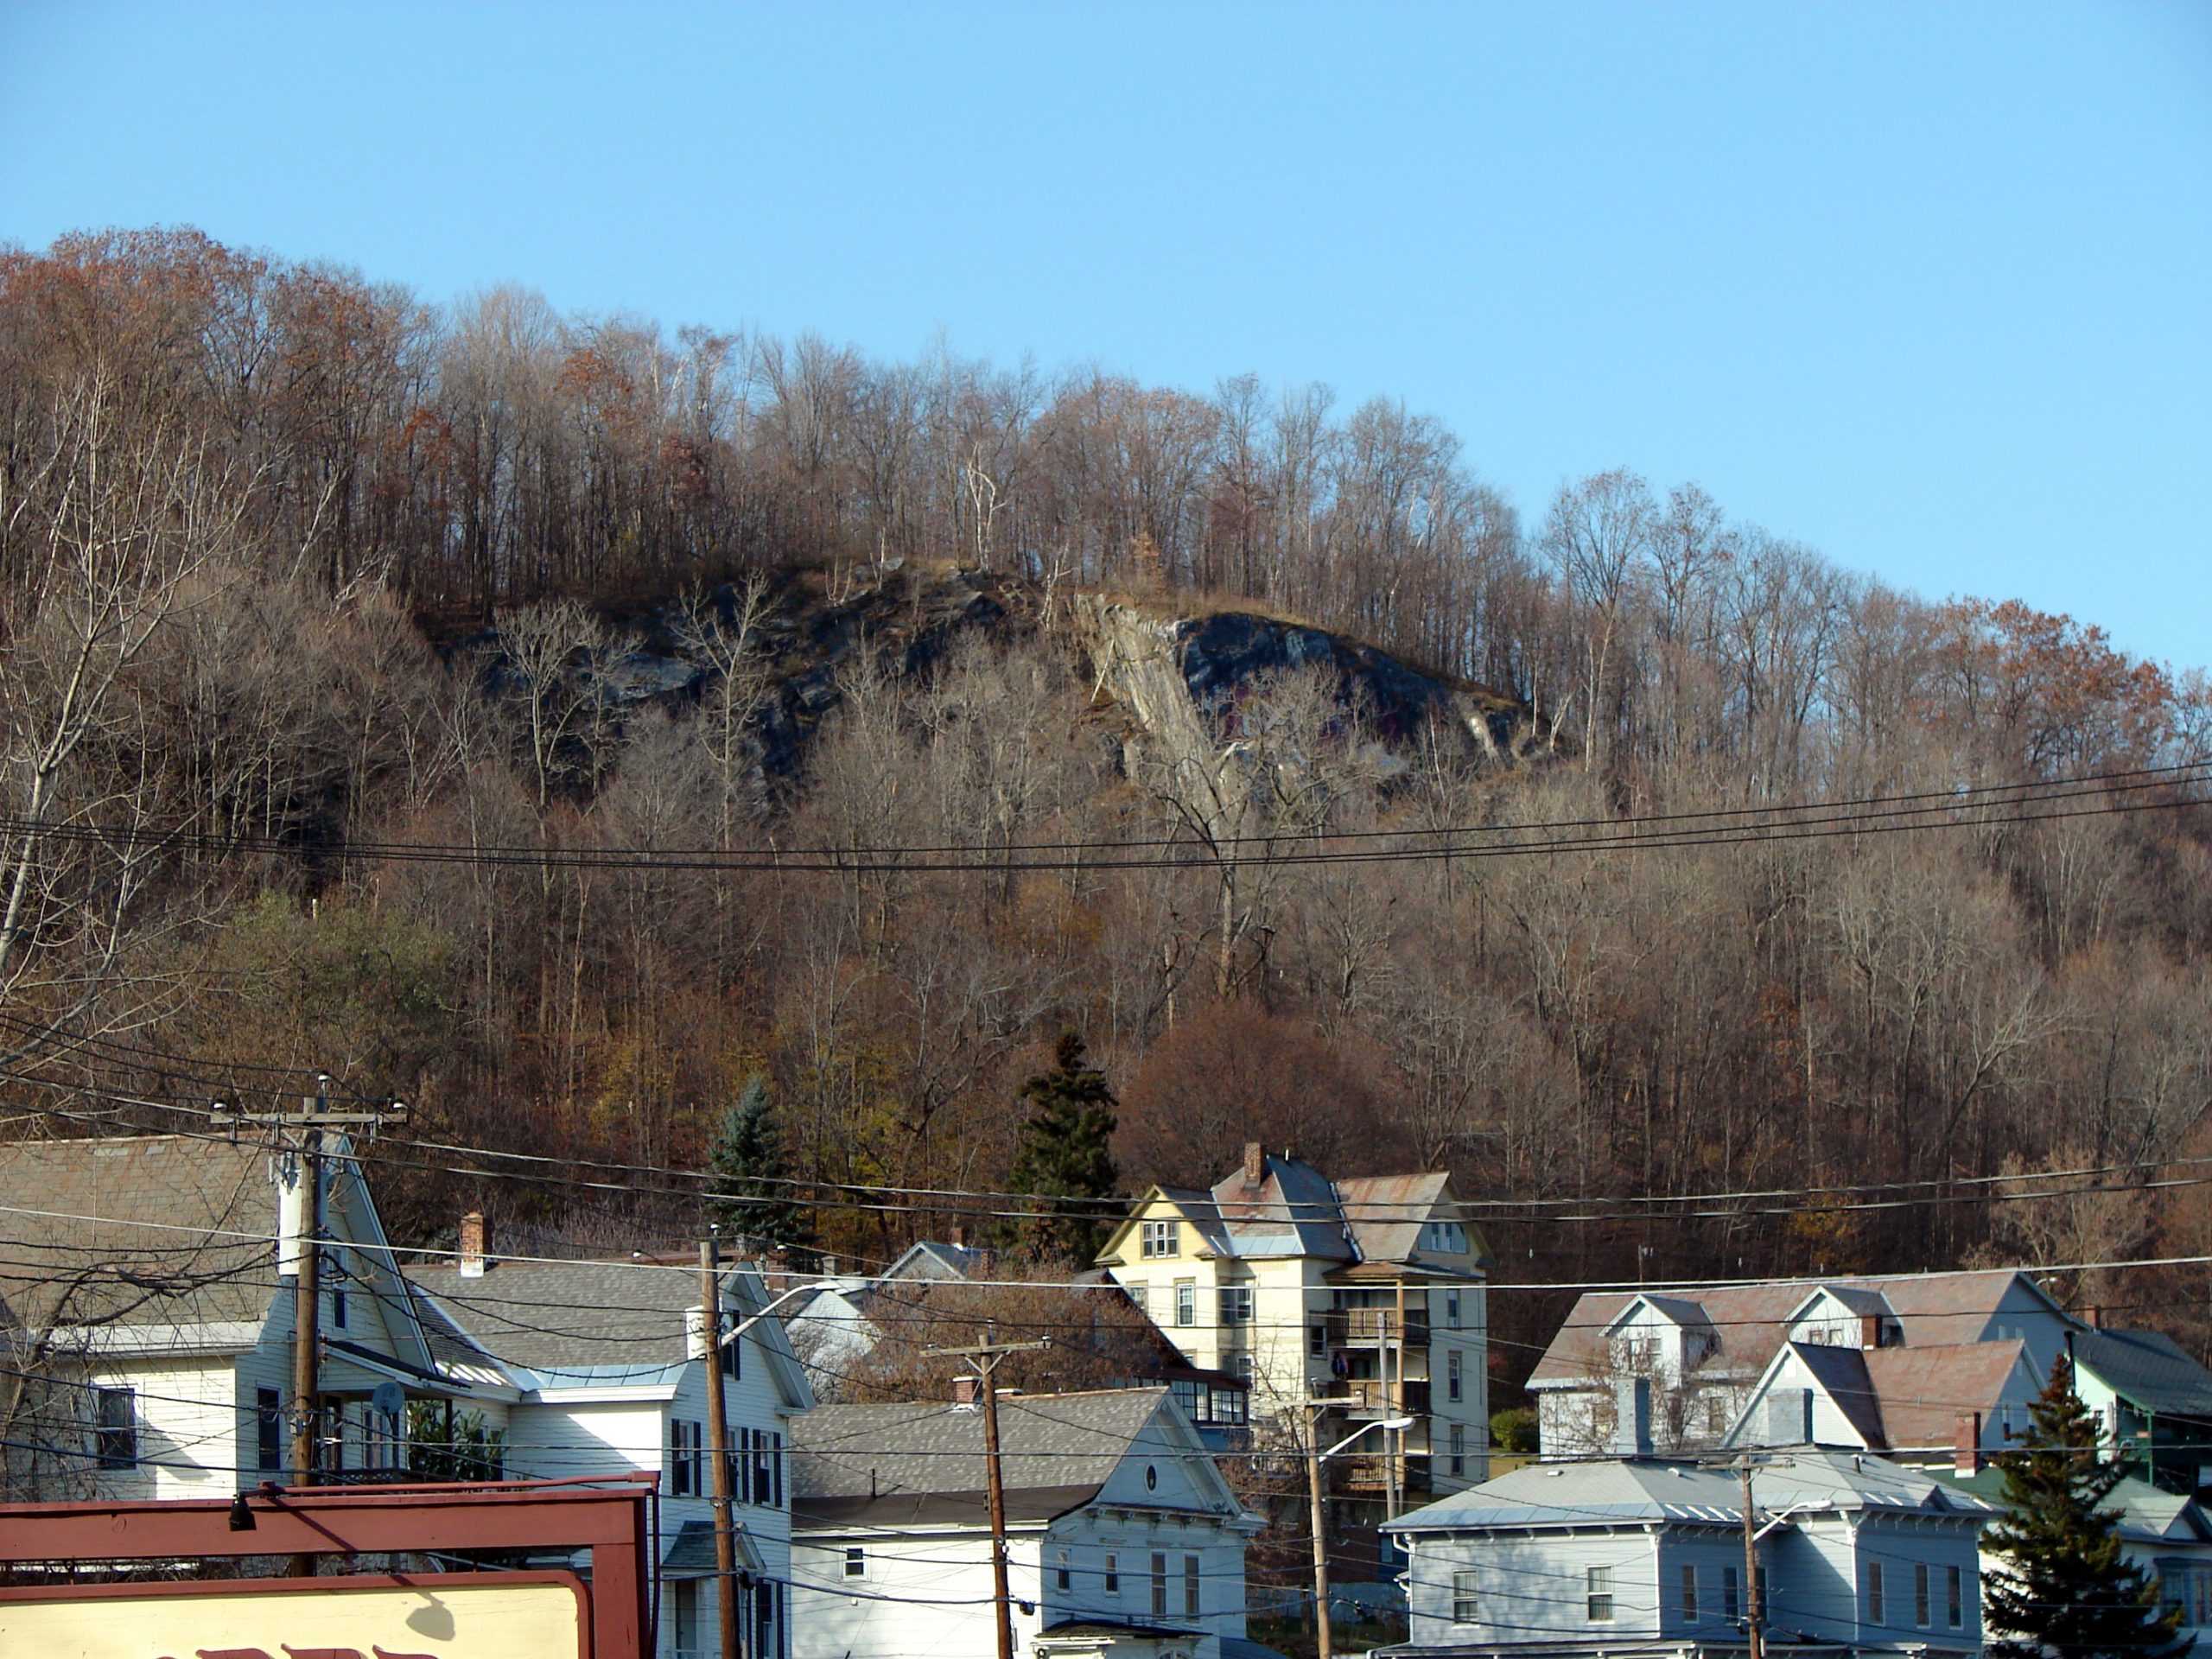 Coca Cola Ledge in North Adams, Massachusetts, is said to be home to a monster.